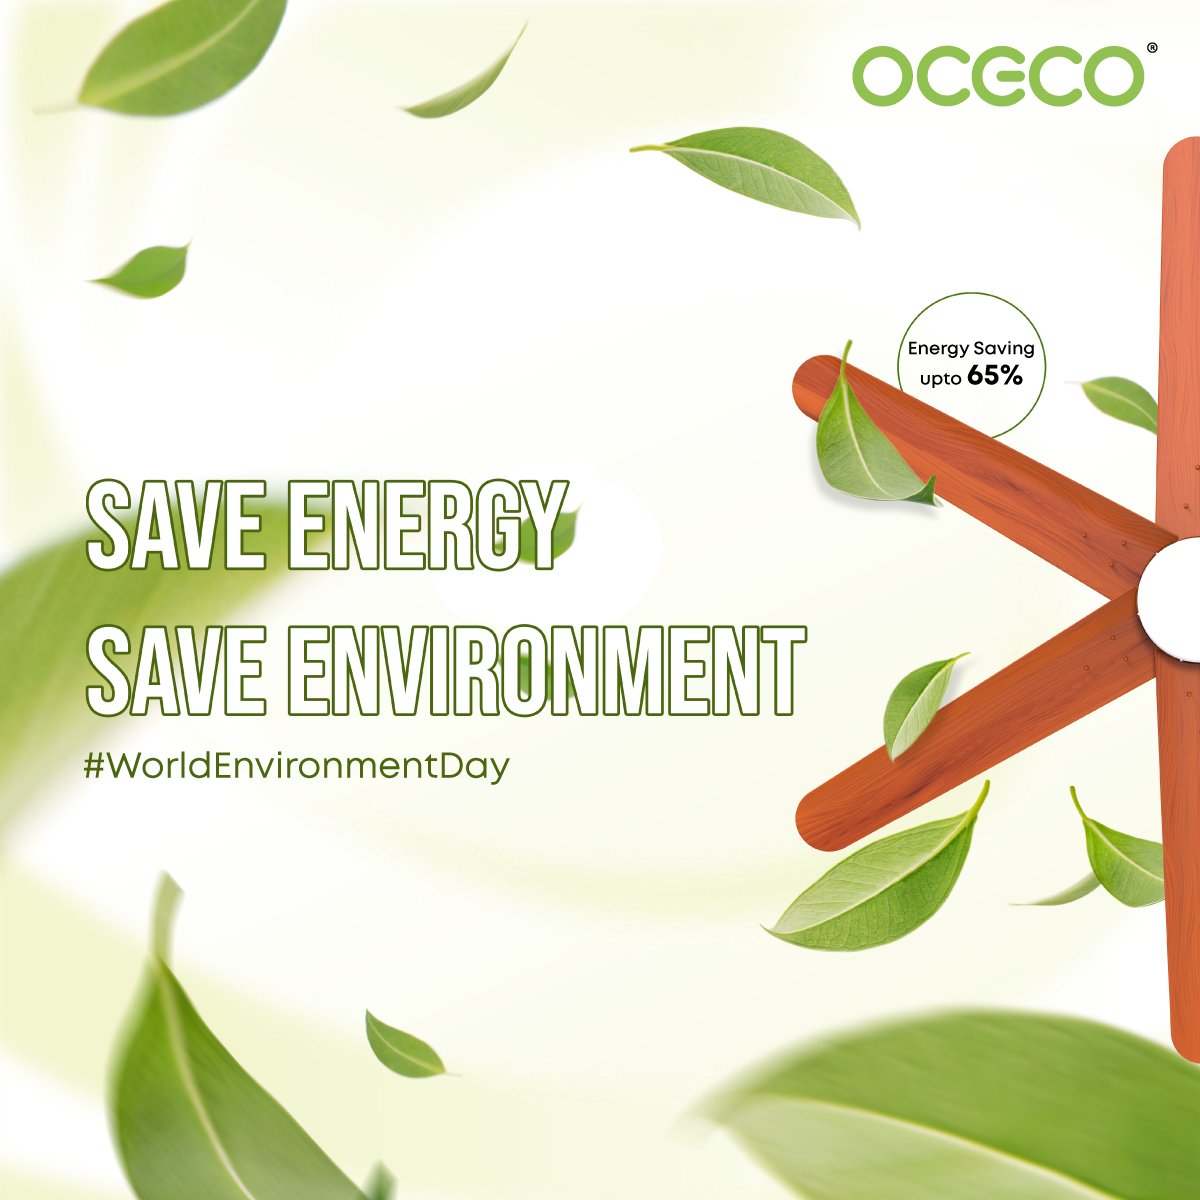 This World Environment Day, save energy by purchasing smart fans and contribute toward building a sustainable future. 

#Oceco #Worldenvironmentday2023 #Environmentday2023 #SaveThePlanet #EnergySaving #CeilingFans #BLDCFans